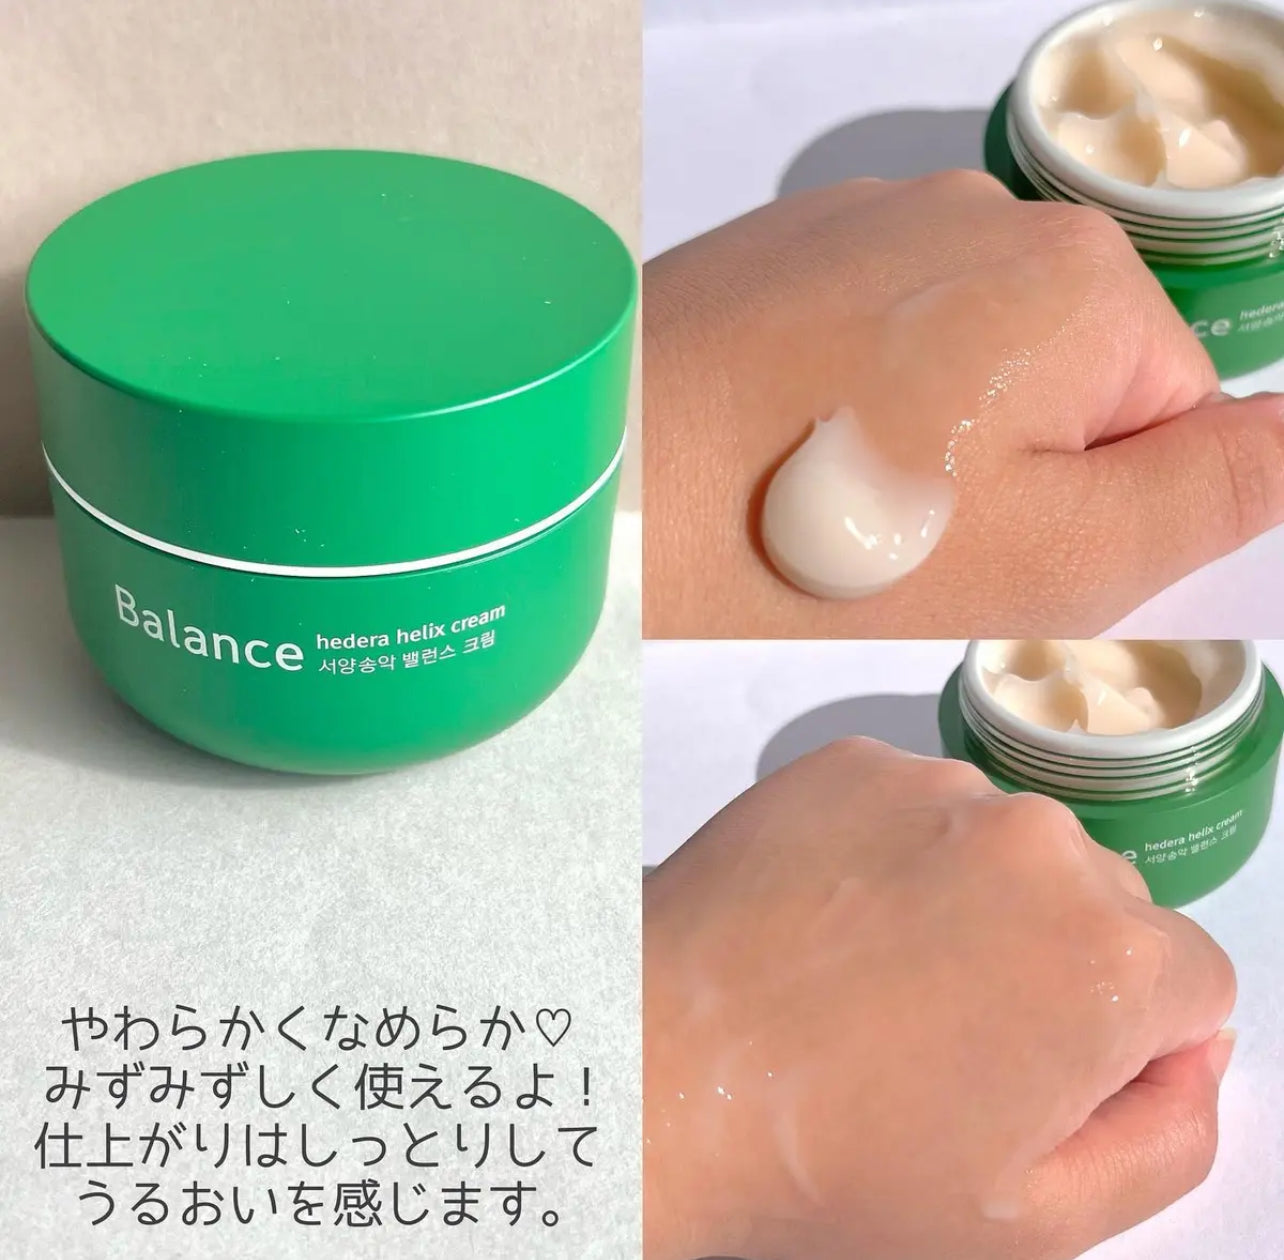 Milktouch 🌼 洋常春藤CICA舒緩全效面霜